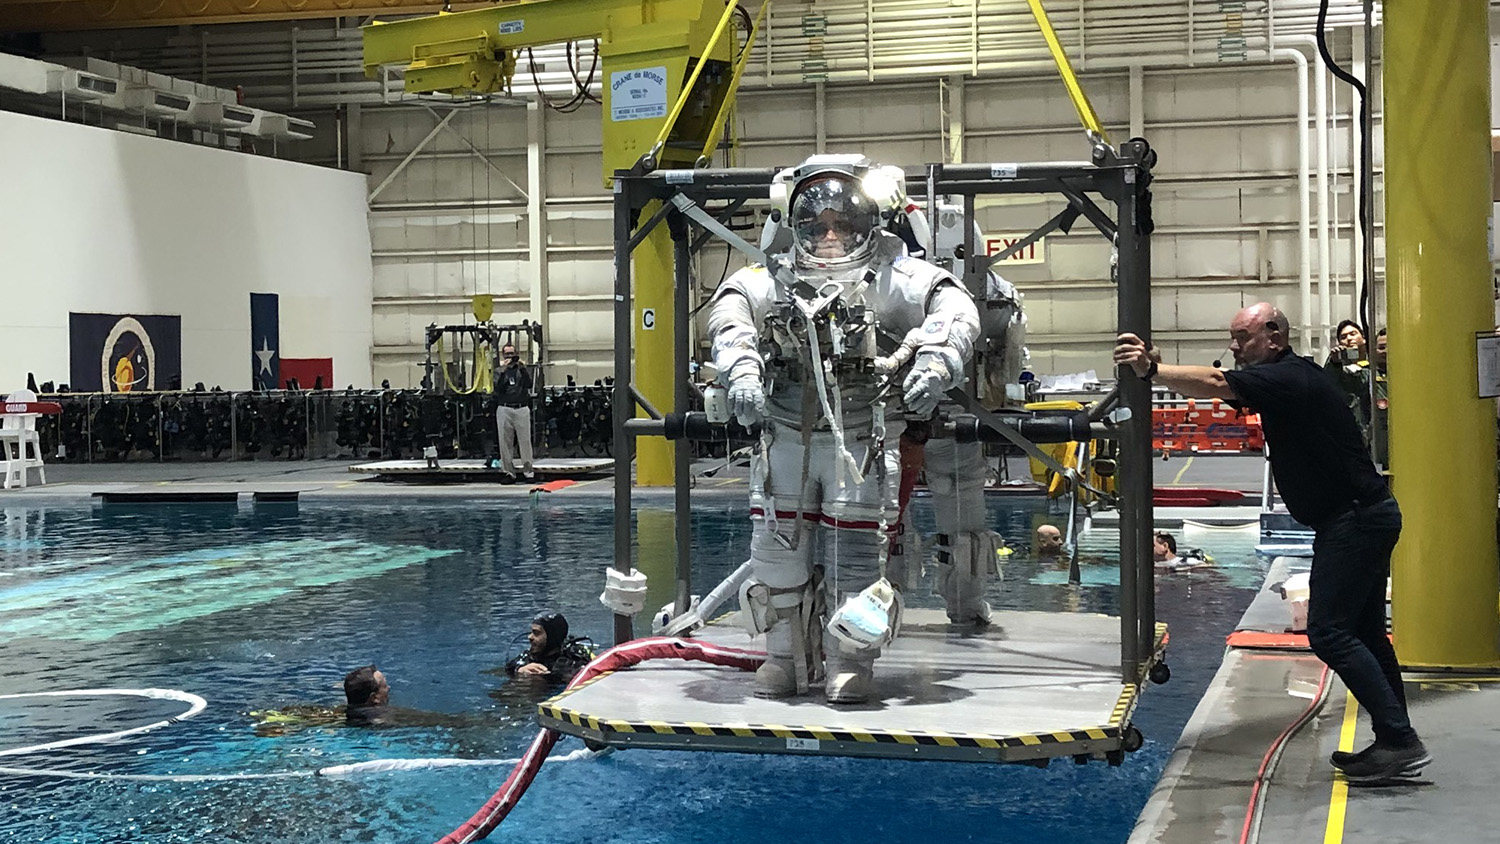 Two astronaut candidates are raised from a buoyancy tank after training